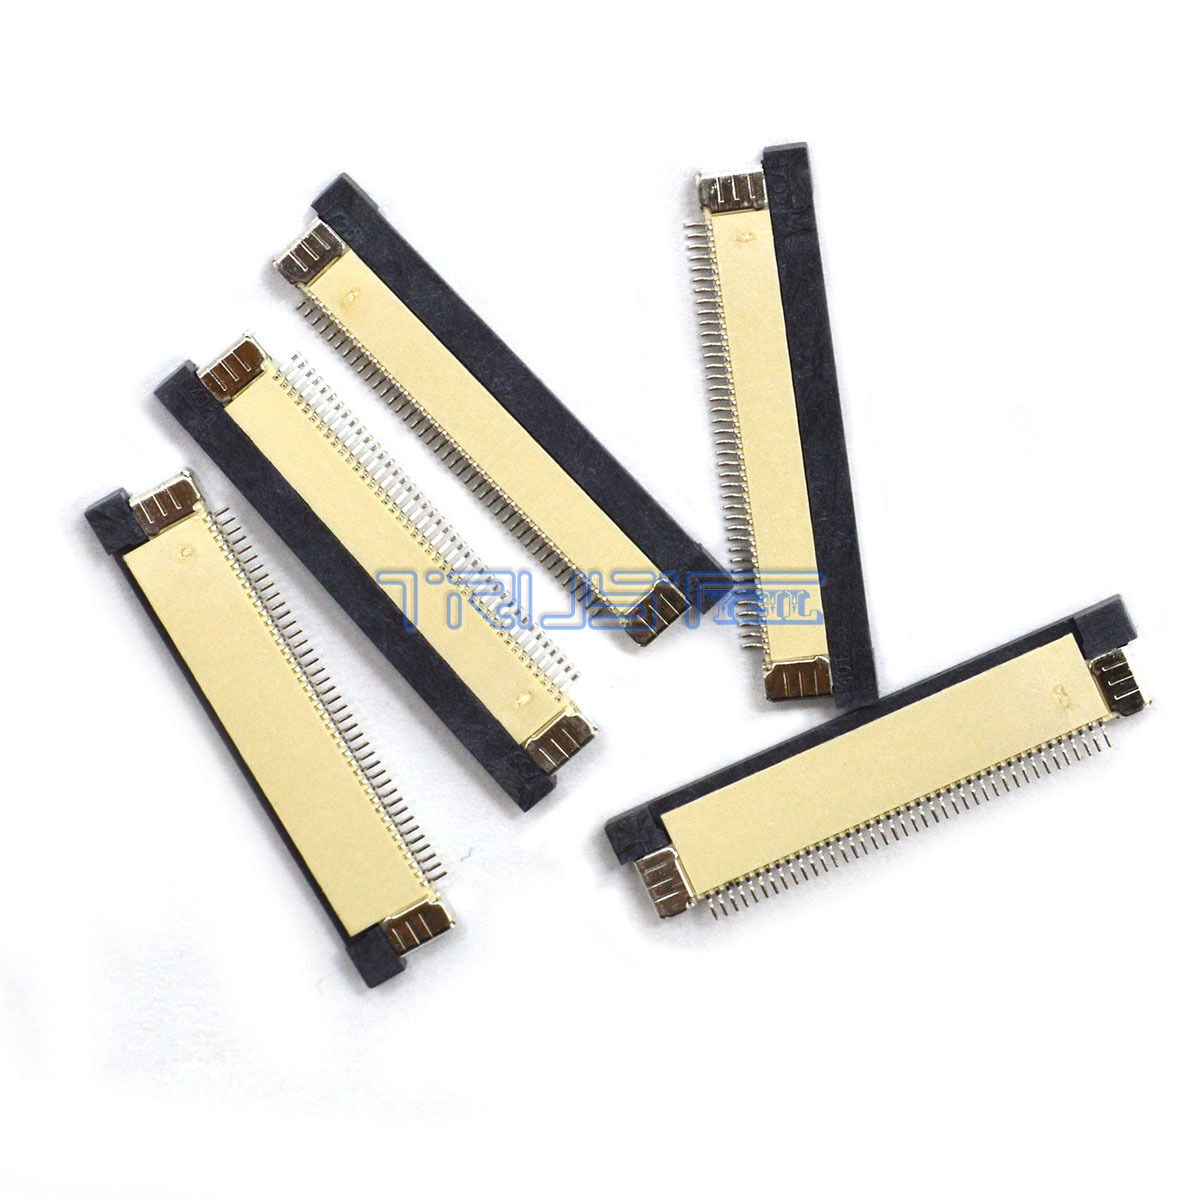 5pcs Ffc/fpc Connector 40pin Pitch 0.5mm Top Contact for sale online 